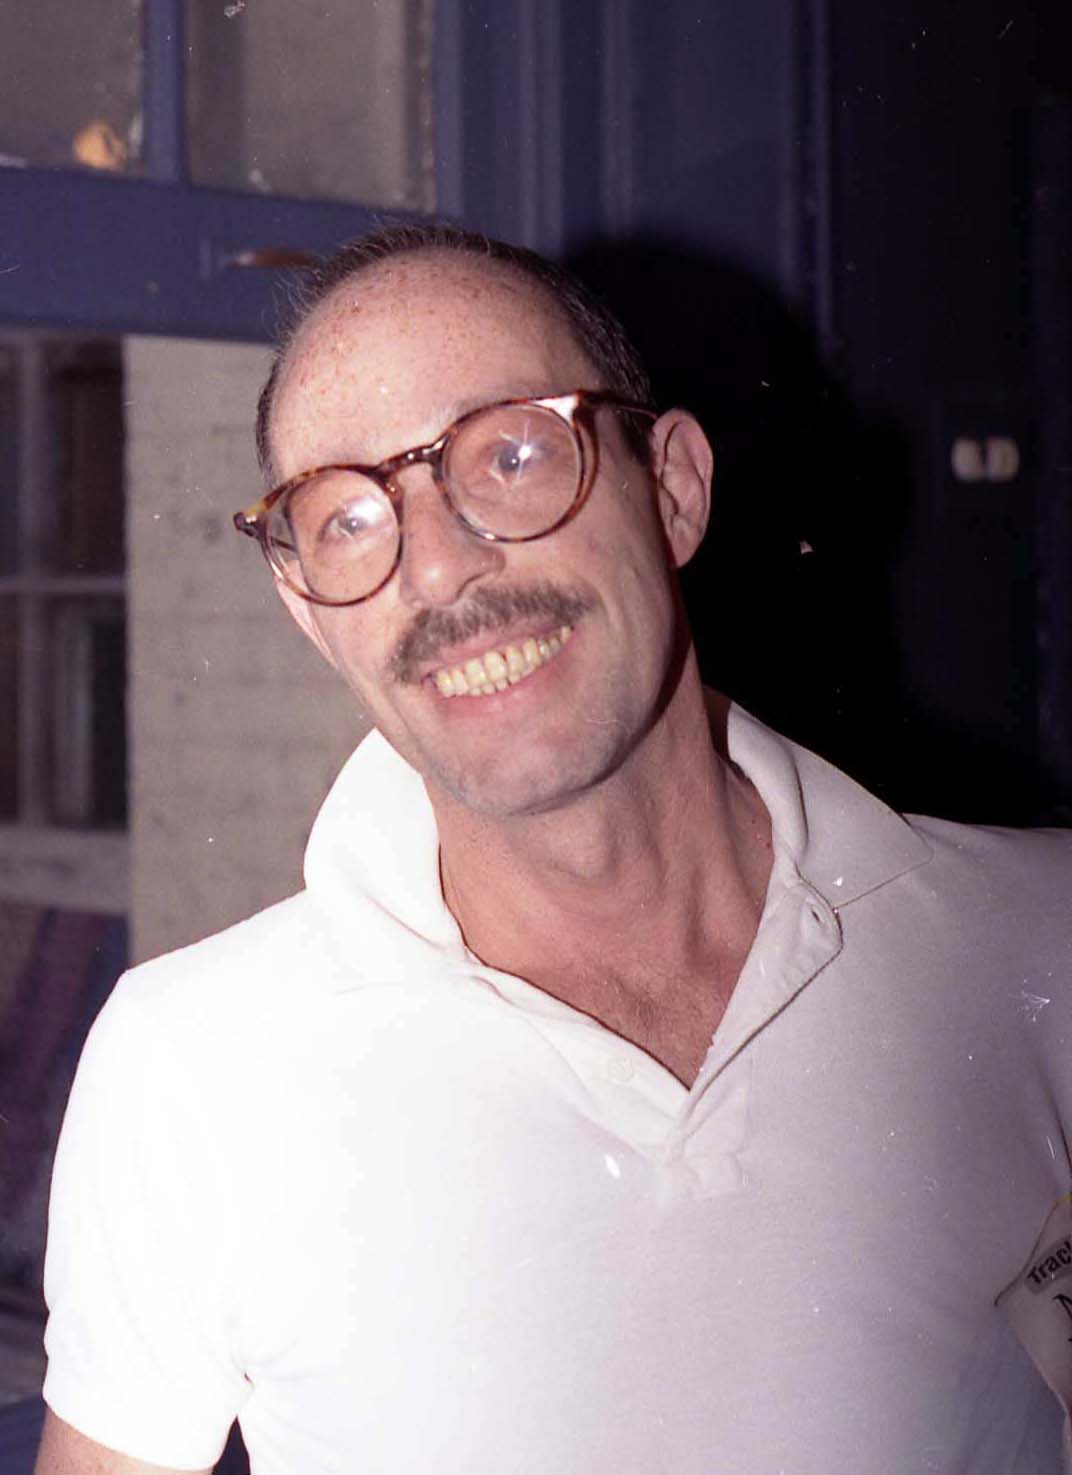 A man in a white shirt and large glasses smiles at the camera.